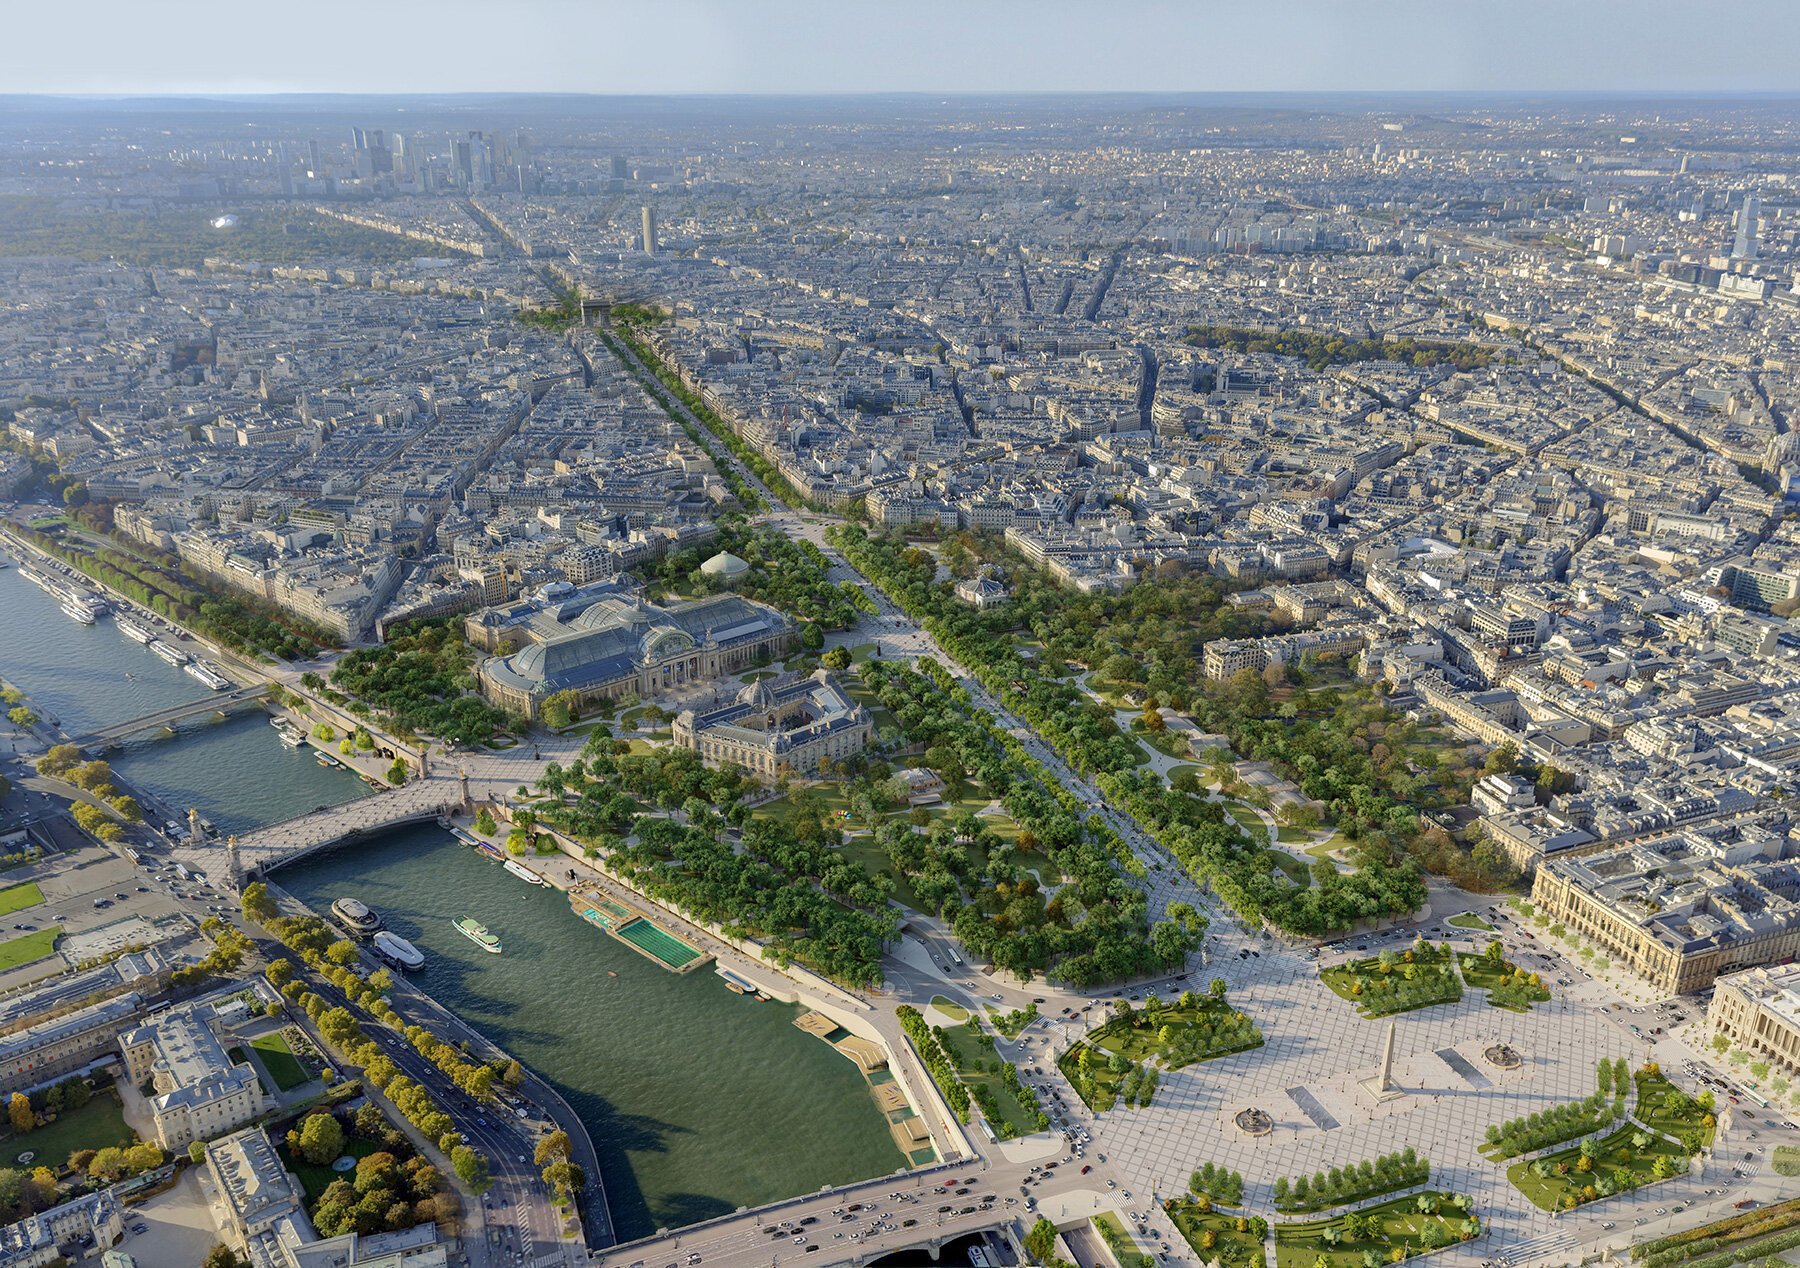 Simulations show that traffic on the Avenue des Champs‐Élysées could already be handled efficiently with a single two‐lane, two‐way road, thus freeing up considerable space for the pedestrian promenade and new mobility. Installing low‐noise road surfacing and the electrification of the vehicle fleet will result in a dramatic reduction in noise pollution, fine particles air pollution, and CO2 emissions by 2030.